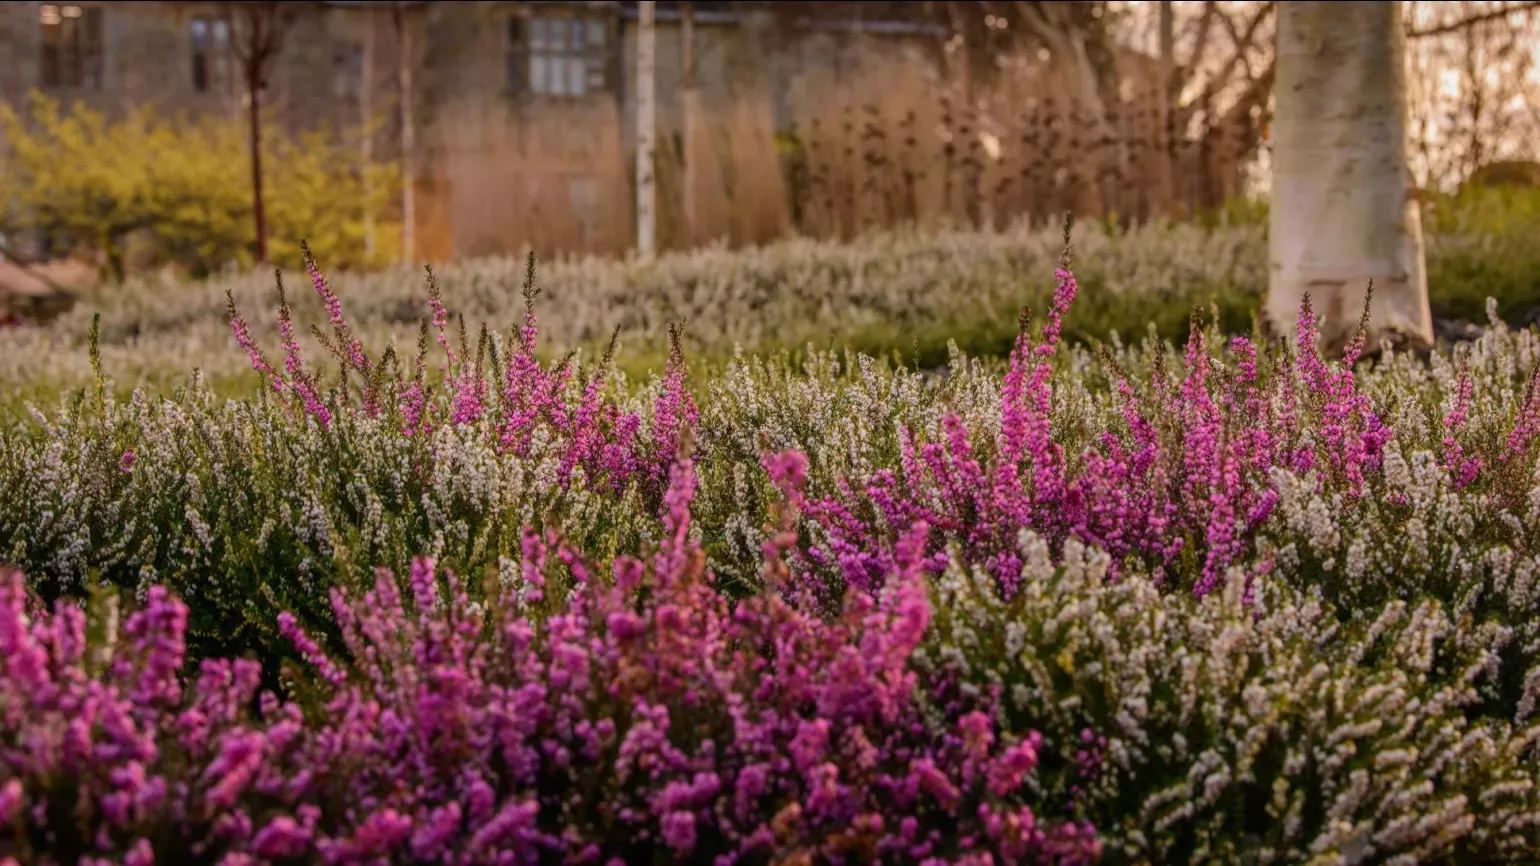 Purple and white heather flowers in the Winter Garden